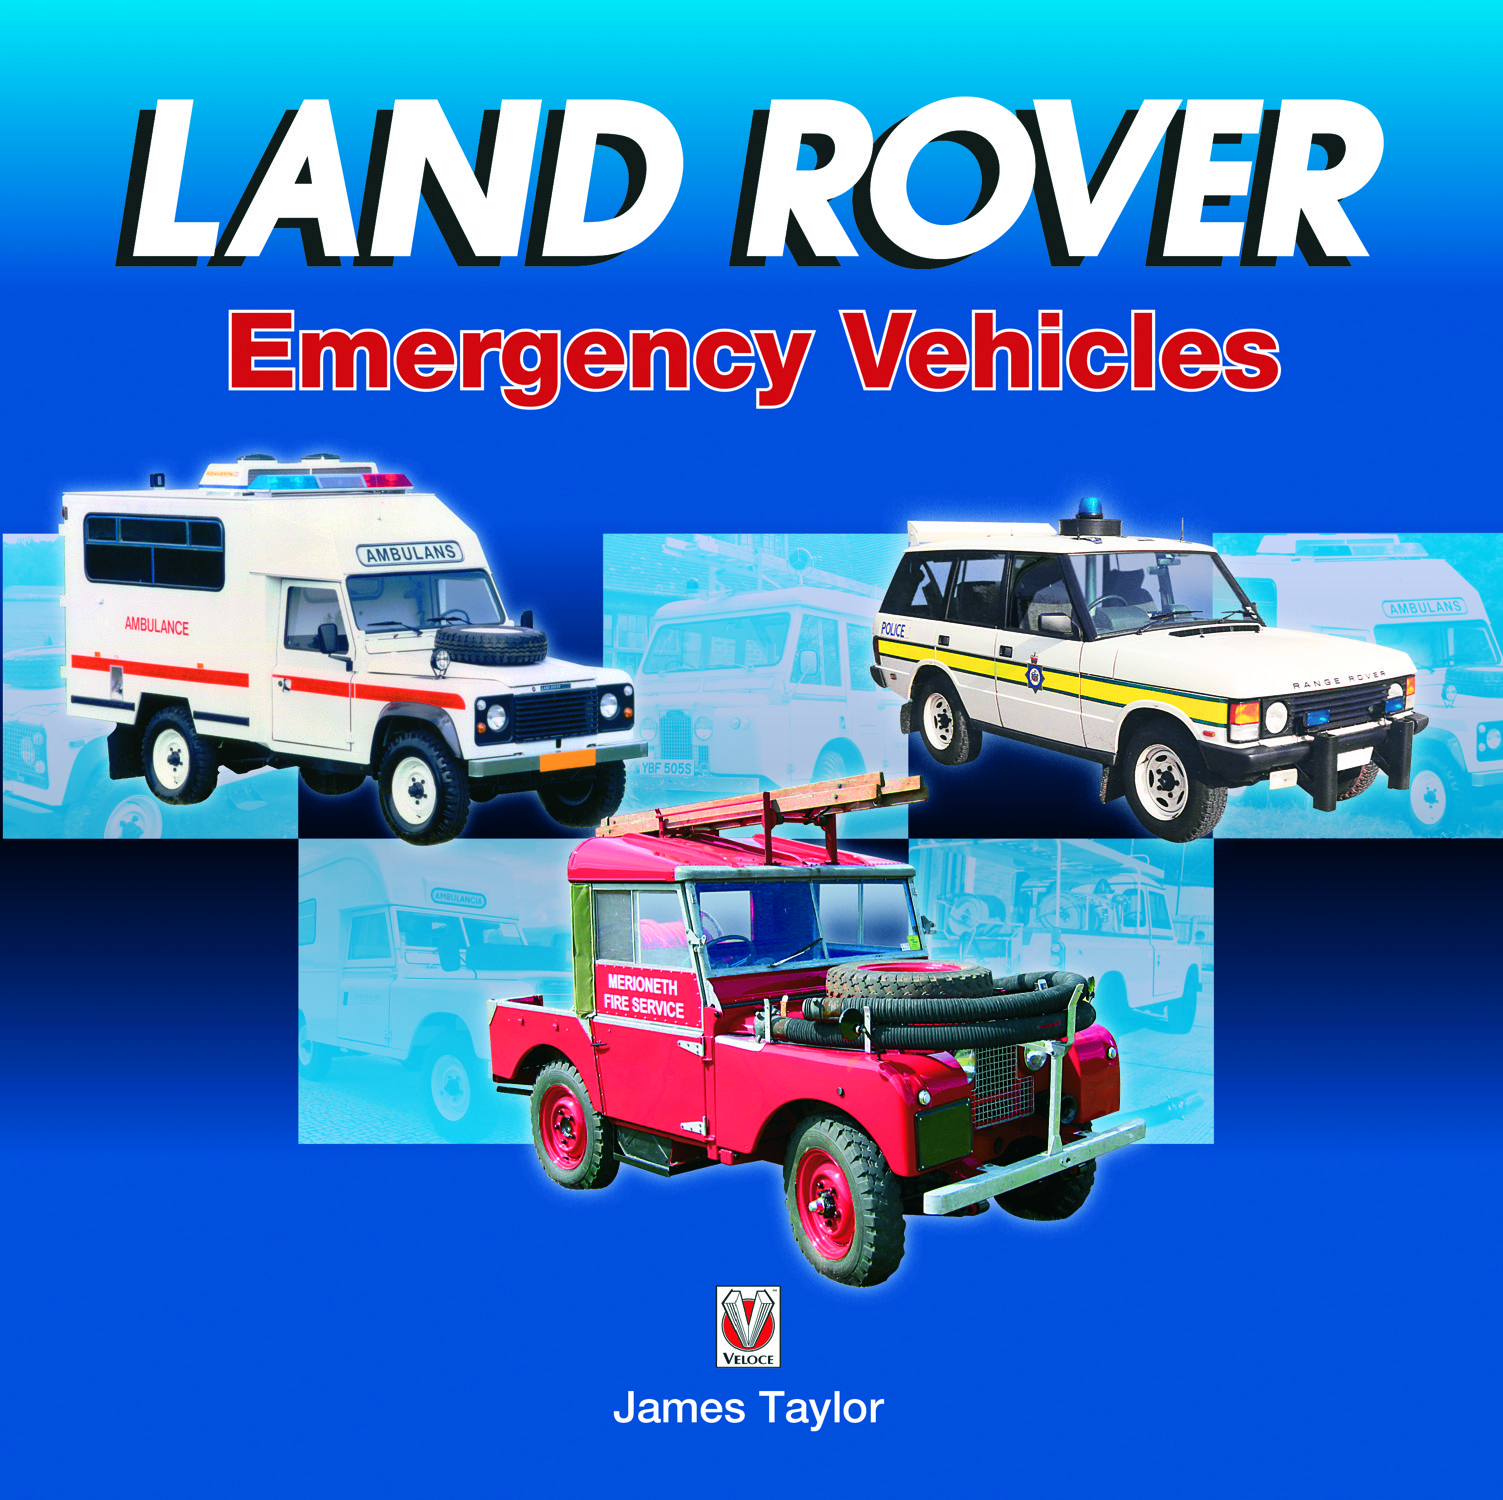 Land Rover Emergency Vehicles, by James Taylor